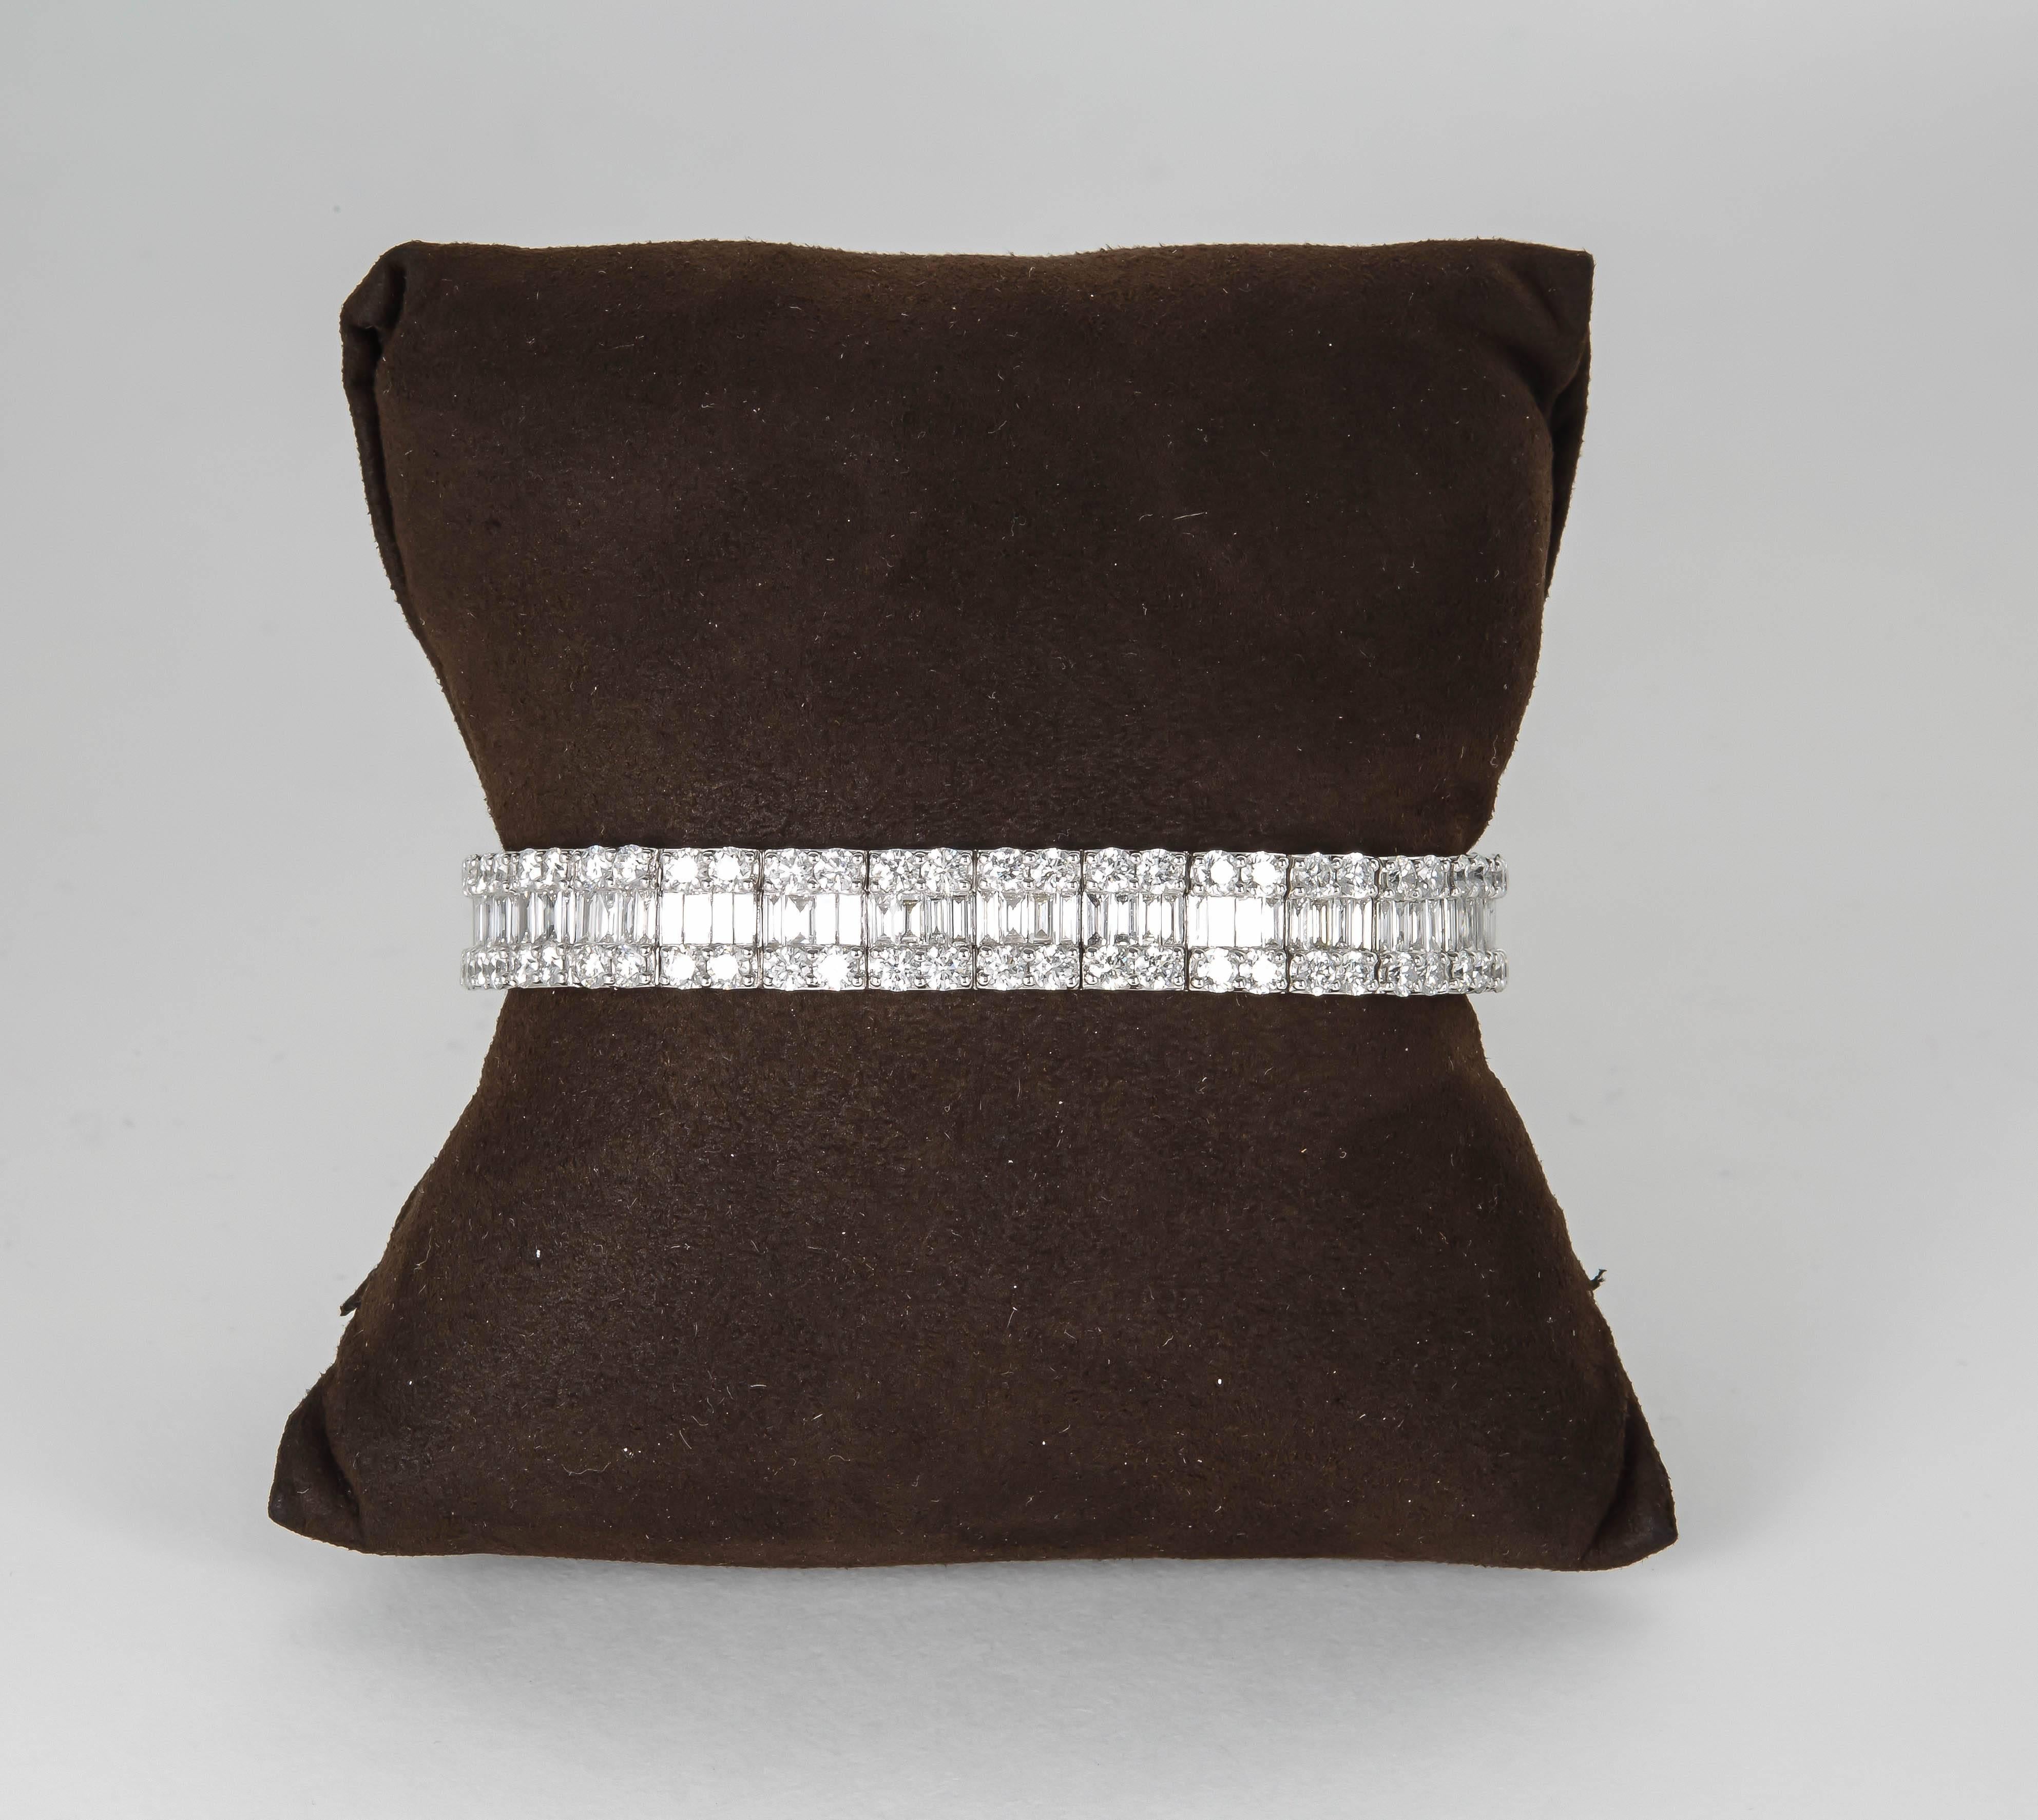 

A gorgeous bracelet that can be worn everyday but still dressy enough for evening. 

15.79 carats of FG color VS clarity baguette and round brilliant cut diamonds set in 18k white gold. This bracelet is full of life!!

A beautiful statement